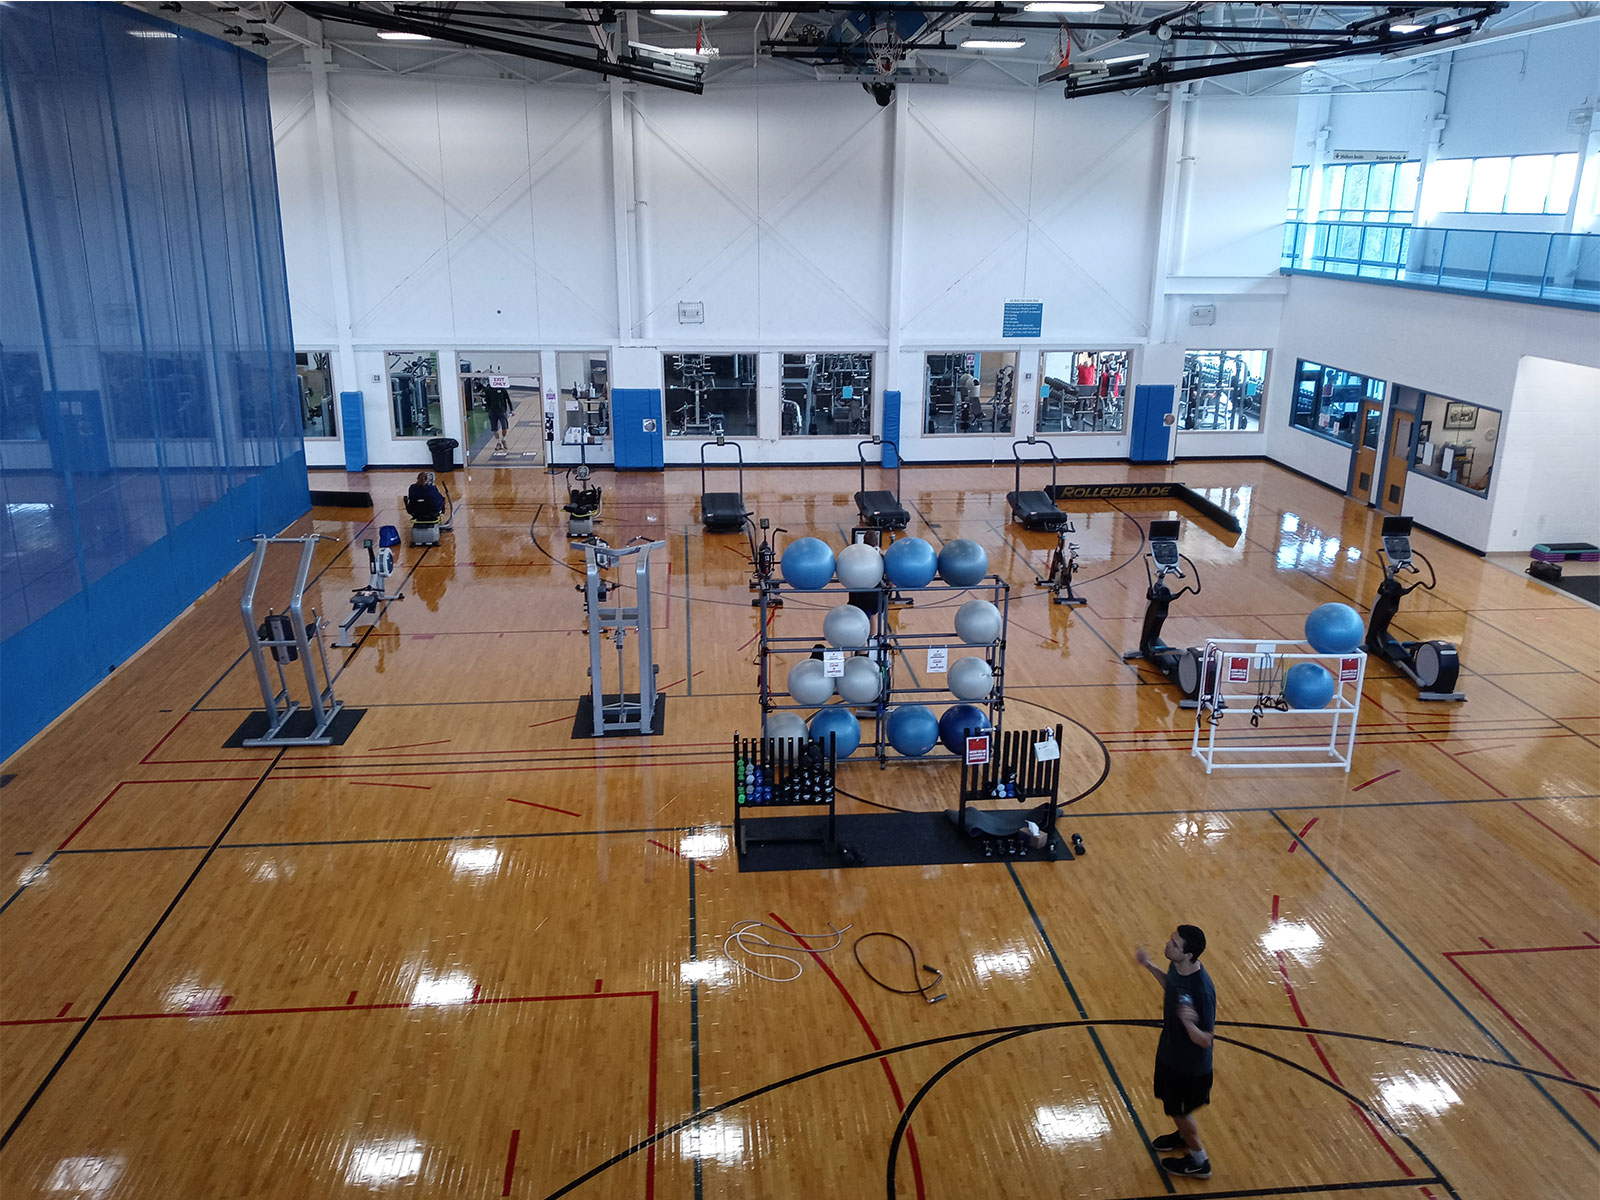 YMCA workout equipment and machines on basketball gym floor.